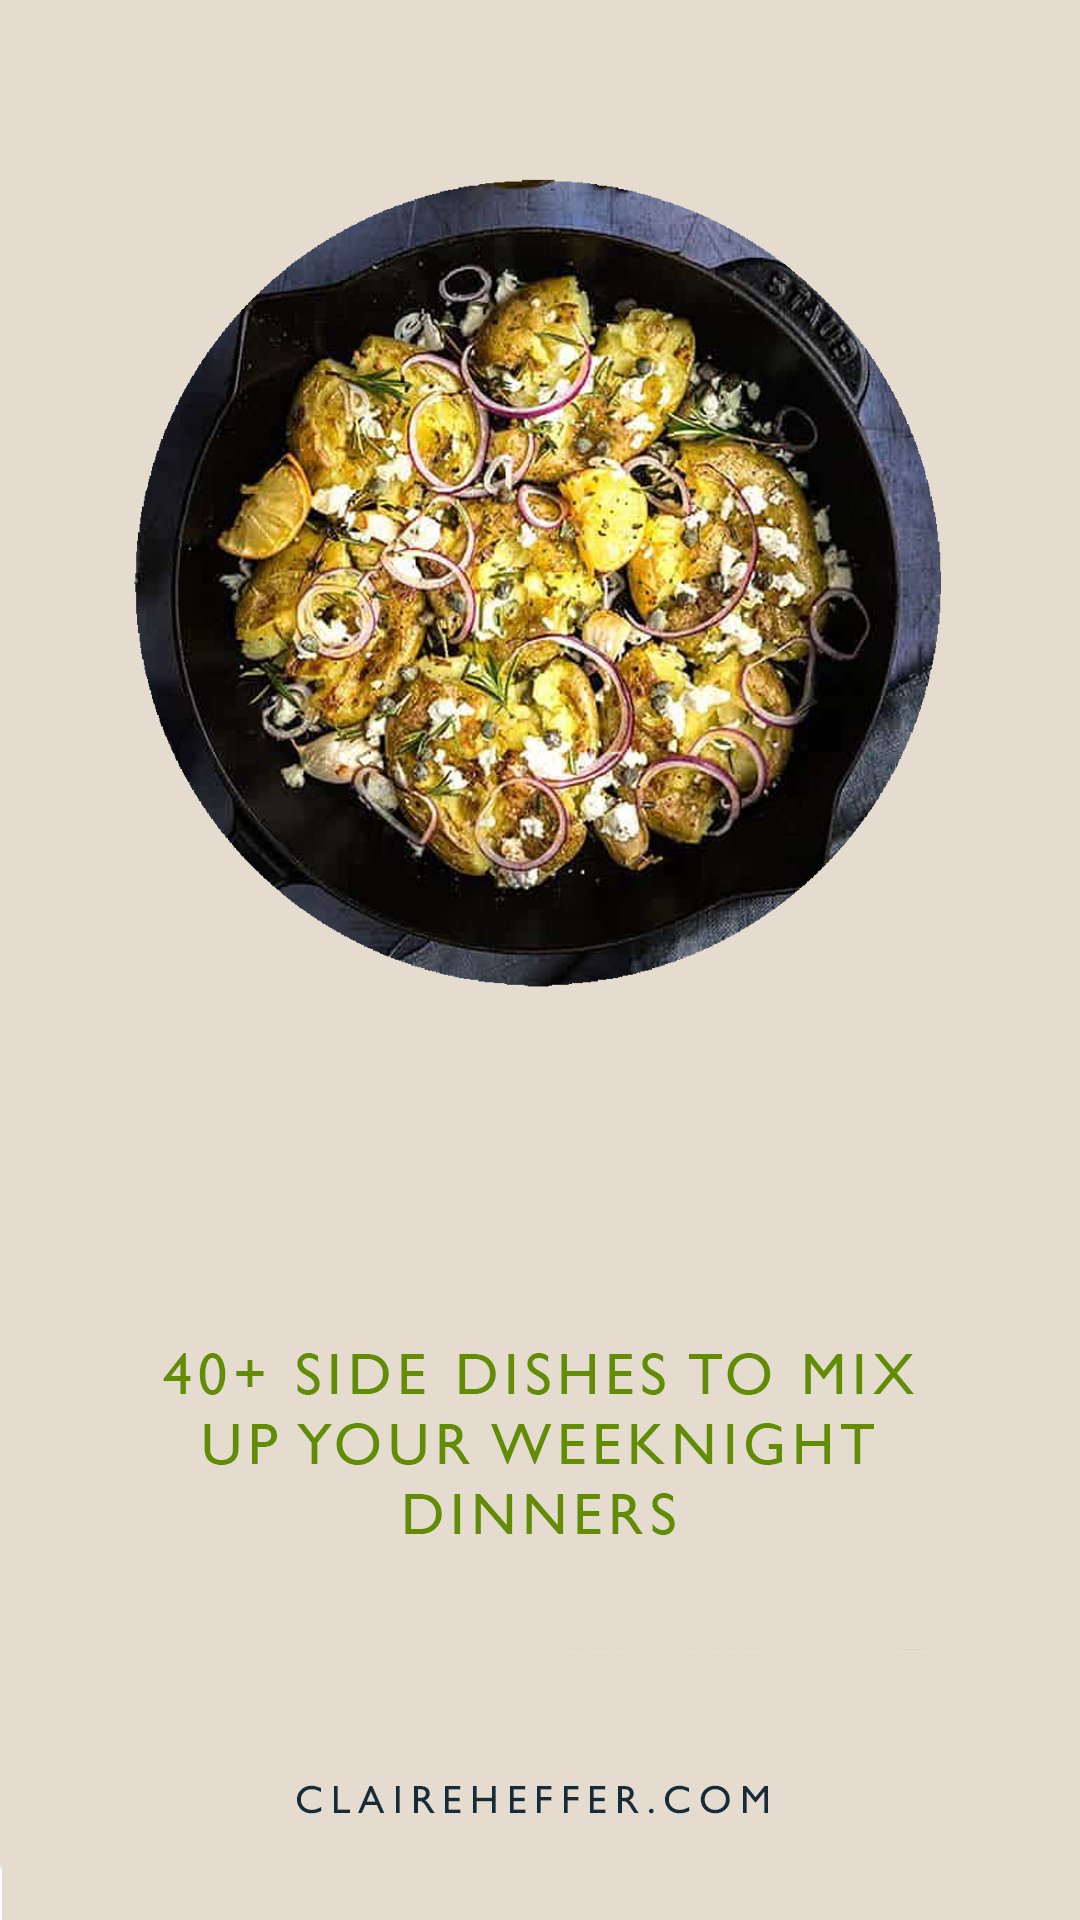 Inspiration, Mix Up Your Weeknight Dinners, Side Dishes To Mix Up Your Weeknight Dinners, Easy Side Dishes, Easy Side Dishes To Transform Your Next Weeknight Meal, Weeknight Meals, 